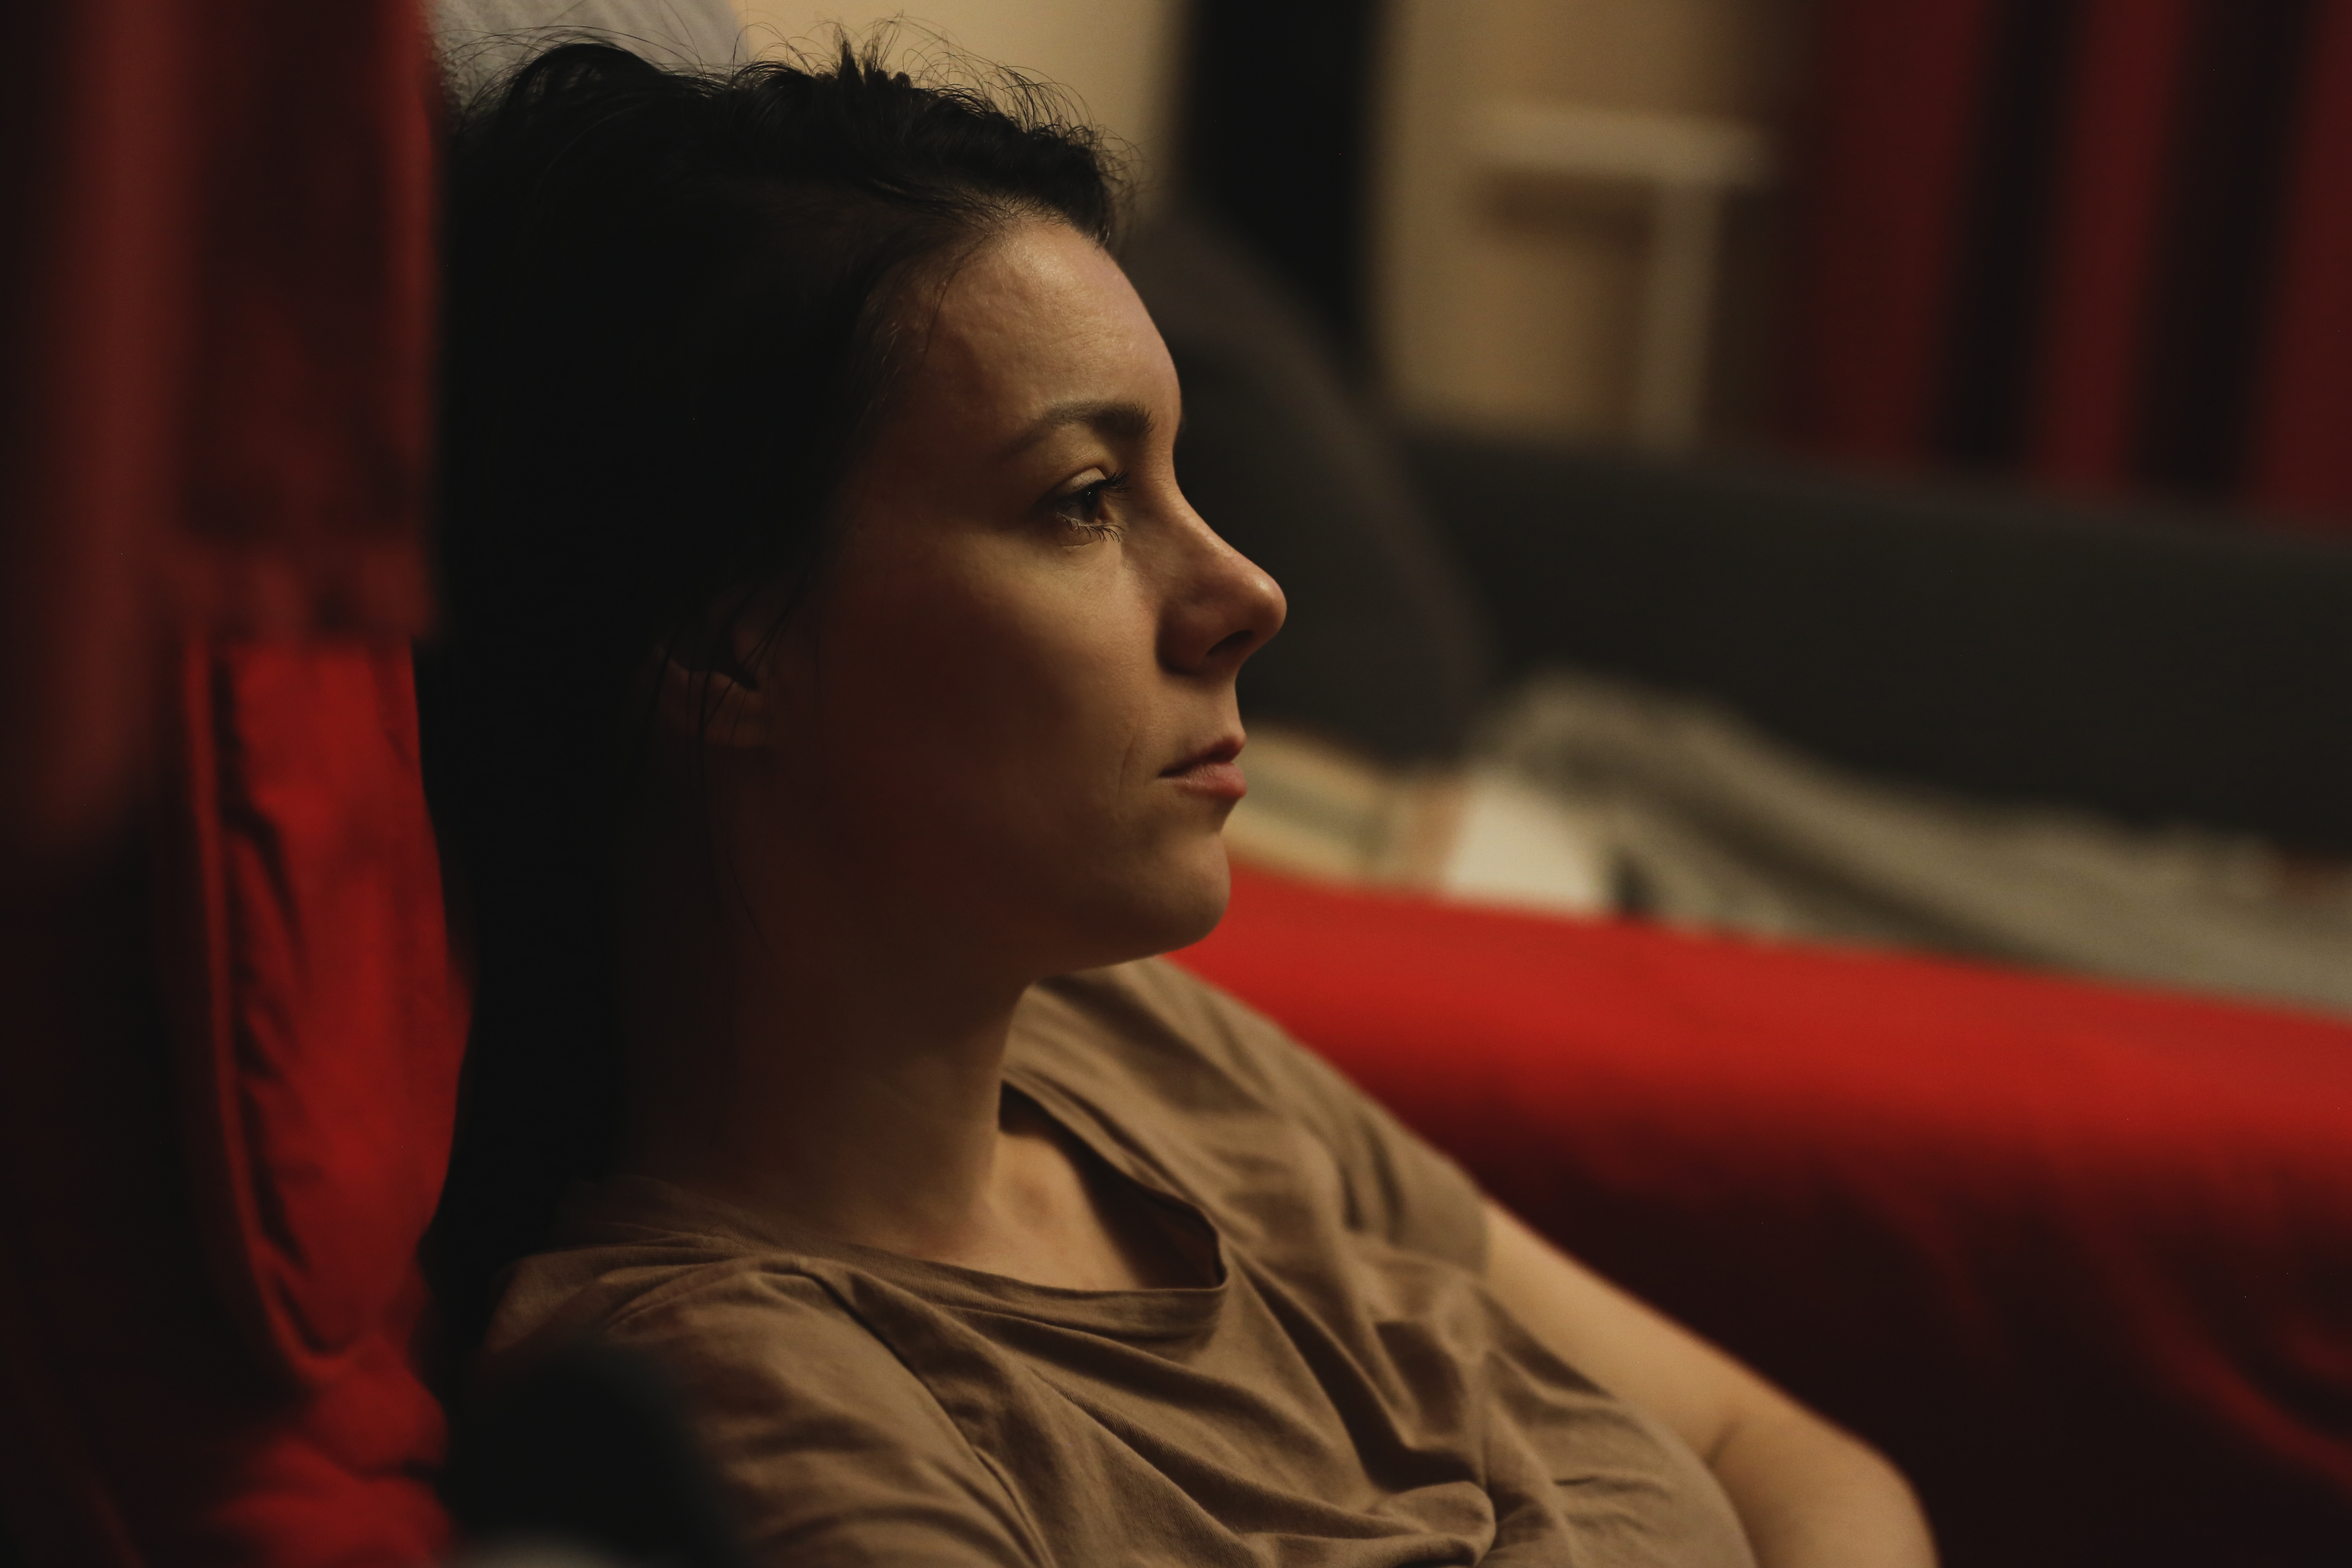 Young Adult Beautiful Woman Tired, Feeling Sad And Relaxing At Home | Source: Getty Images